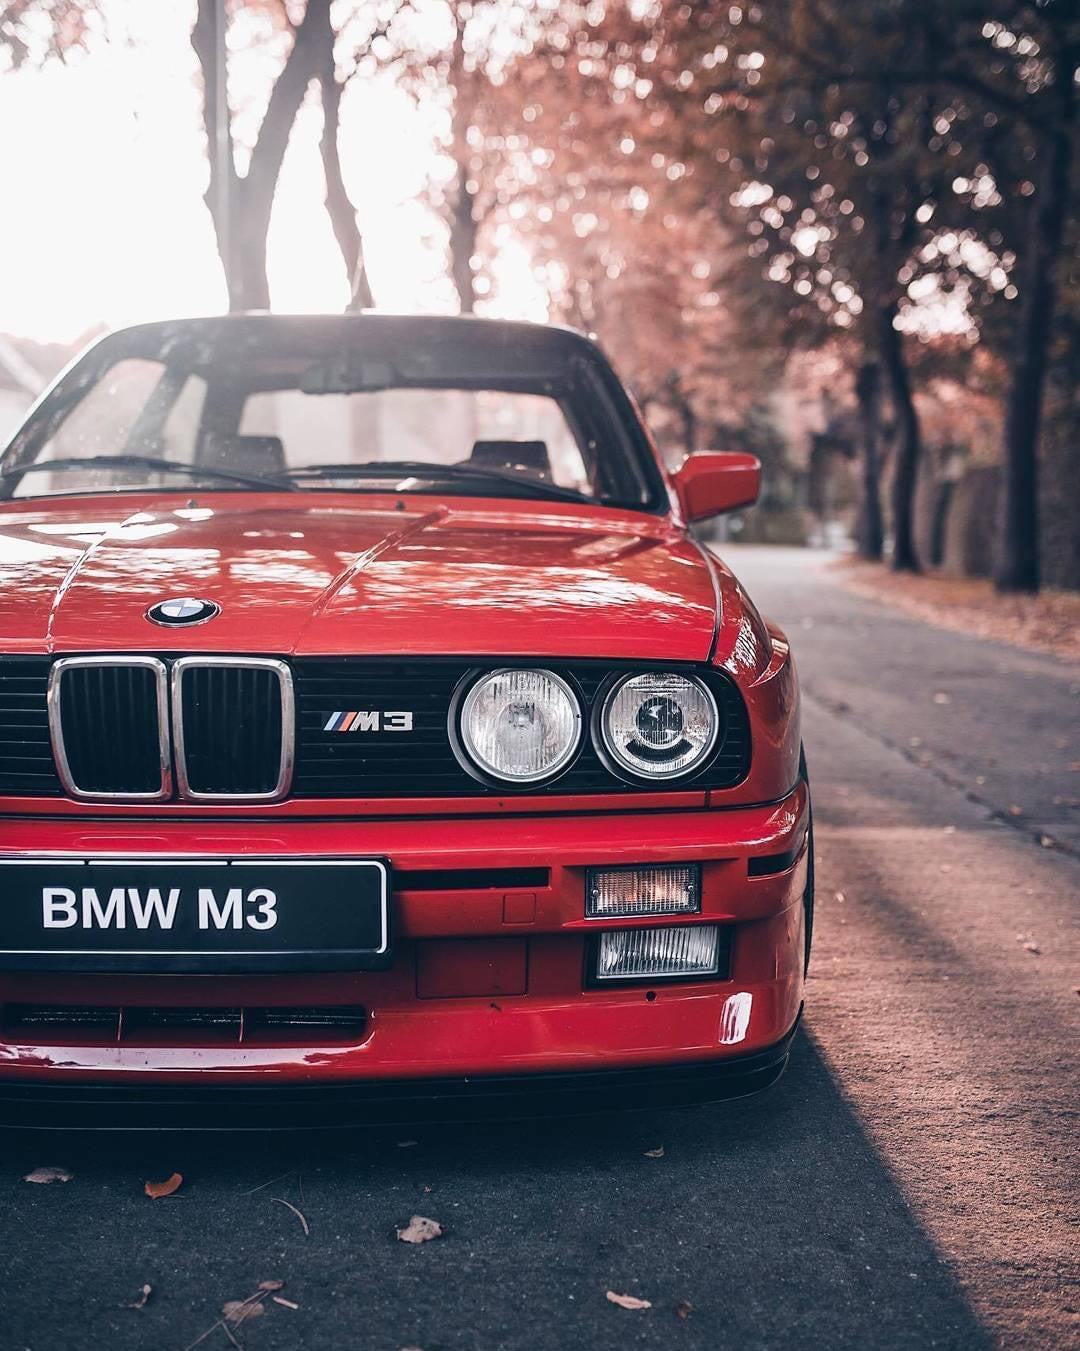 Red BMW E30 M3 sportscar parked on a city street with the iconic BMW logo on the grill and the M3 badge on the back